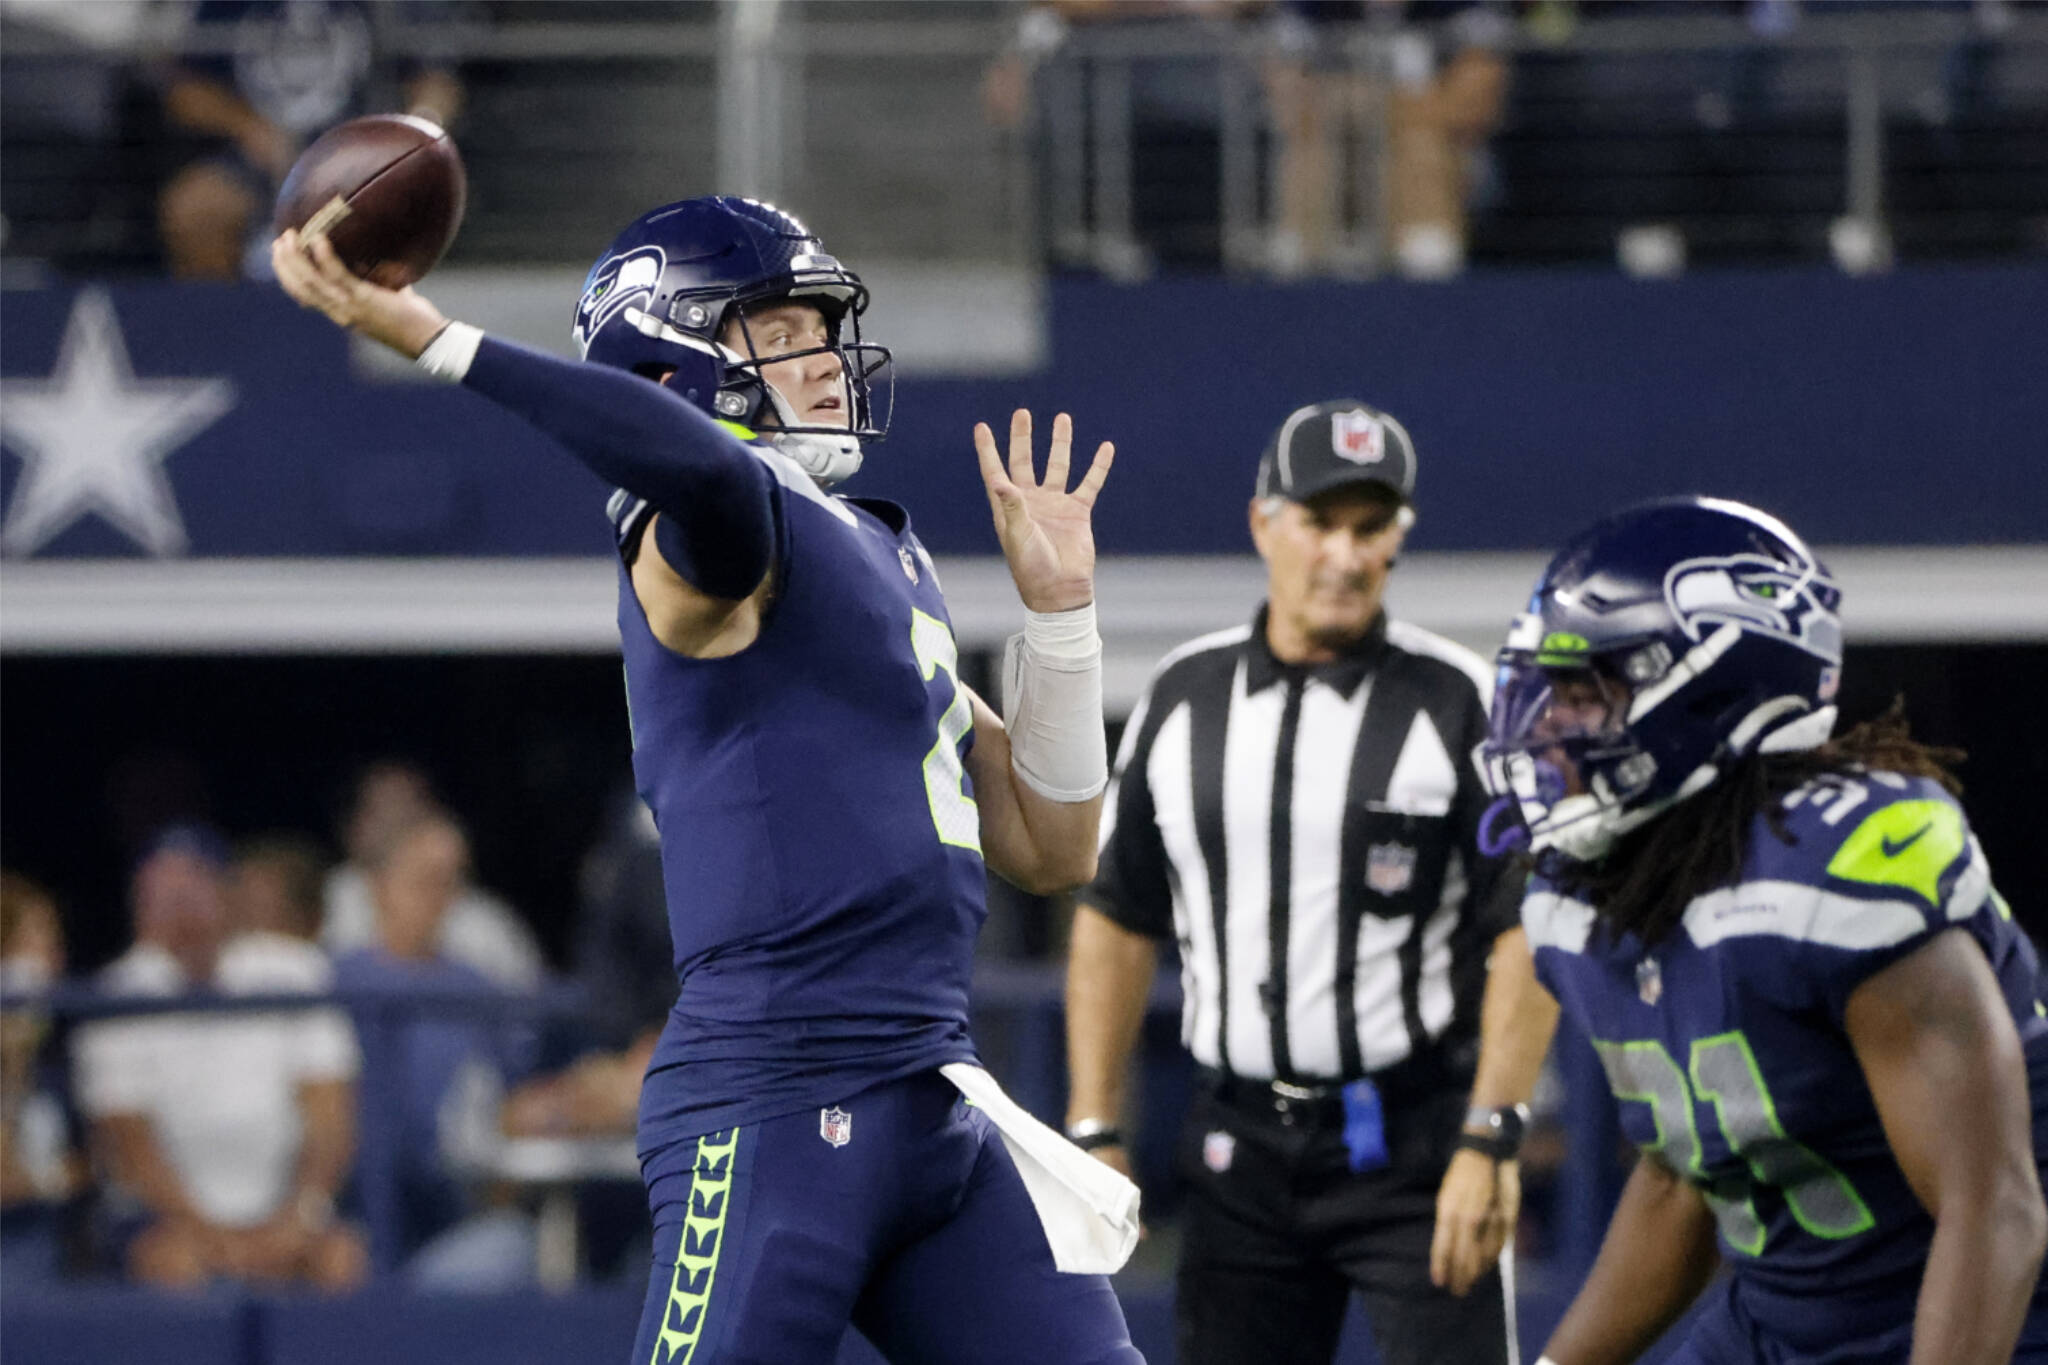 Seattle Seahawks quarterback Drew Lock (2) throws a pass in the first half of Friday’s preseason game against the Dallas Cowboys in Arlington, Texas. (AP Photo/Michael Ainsworth)